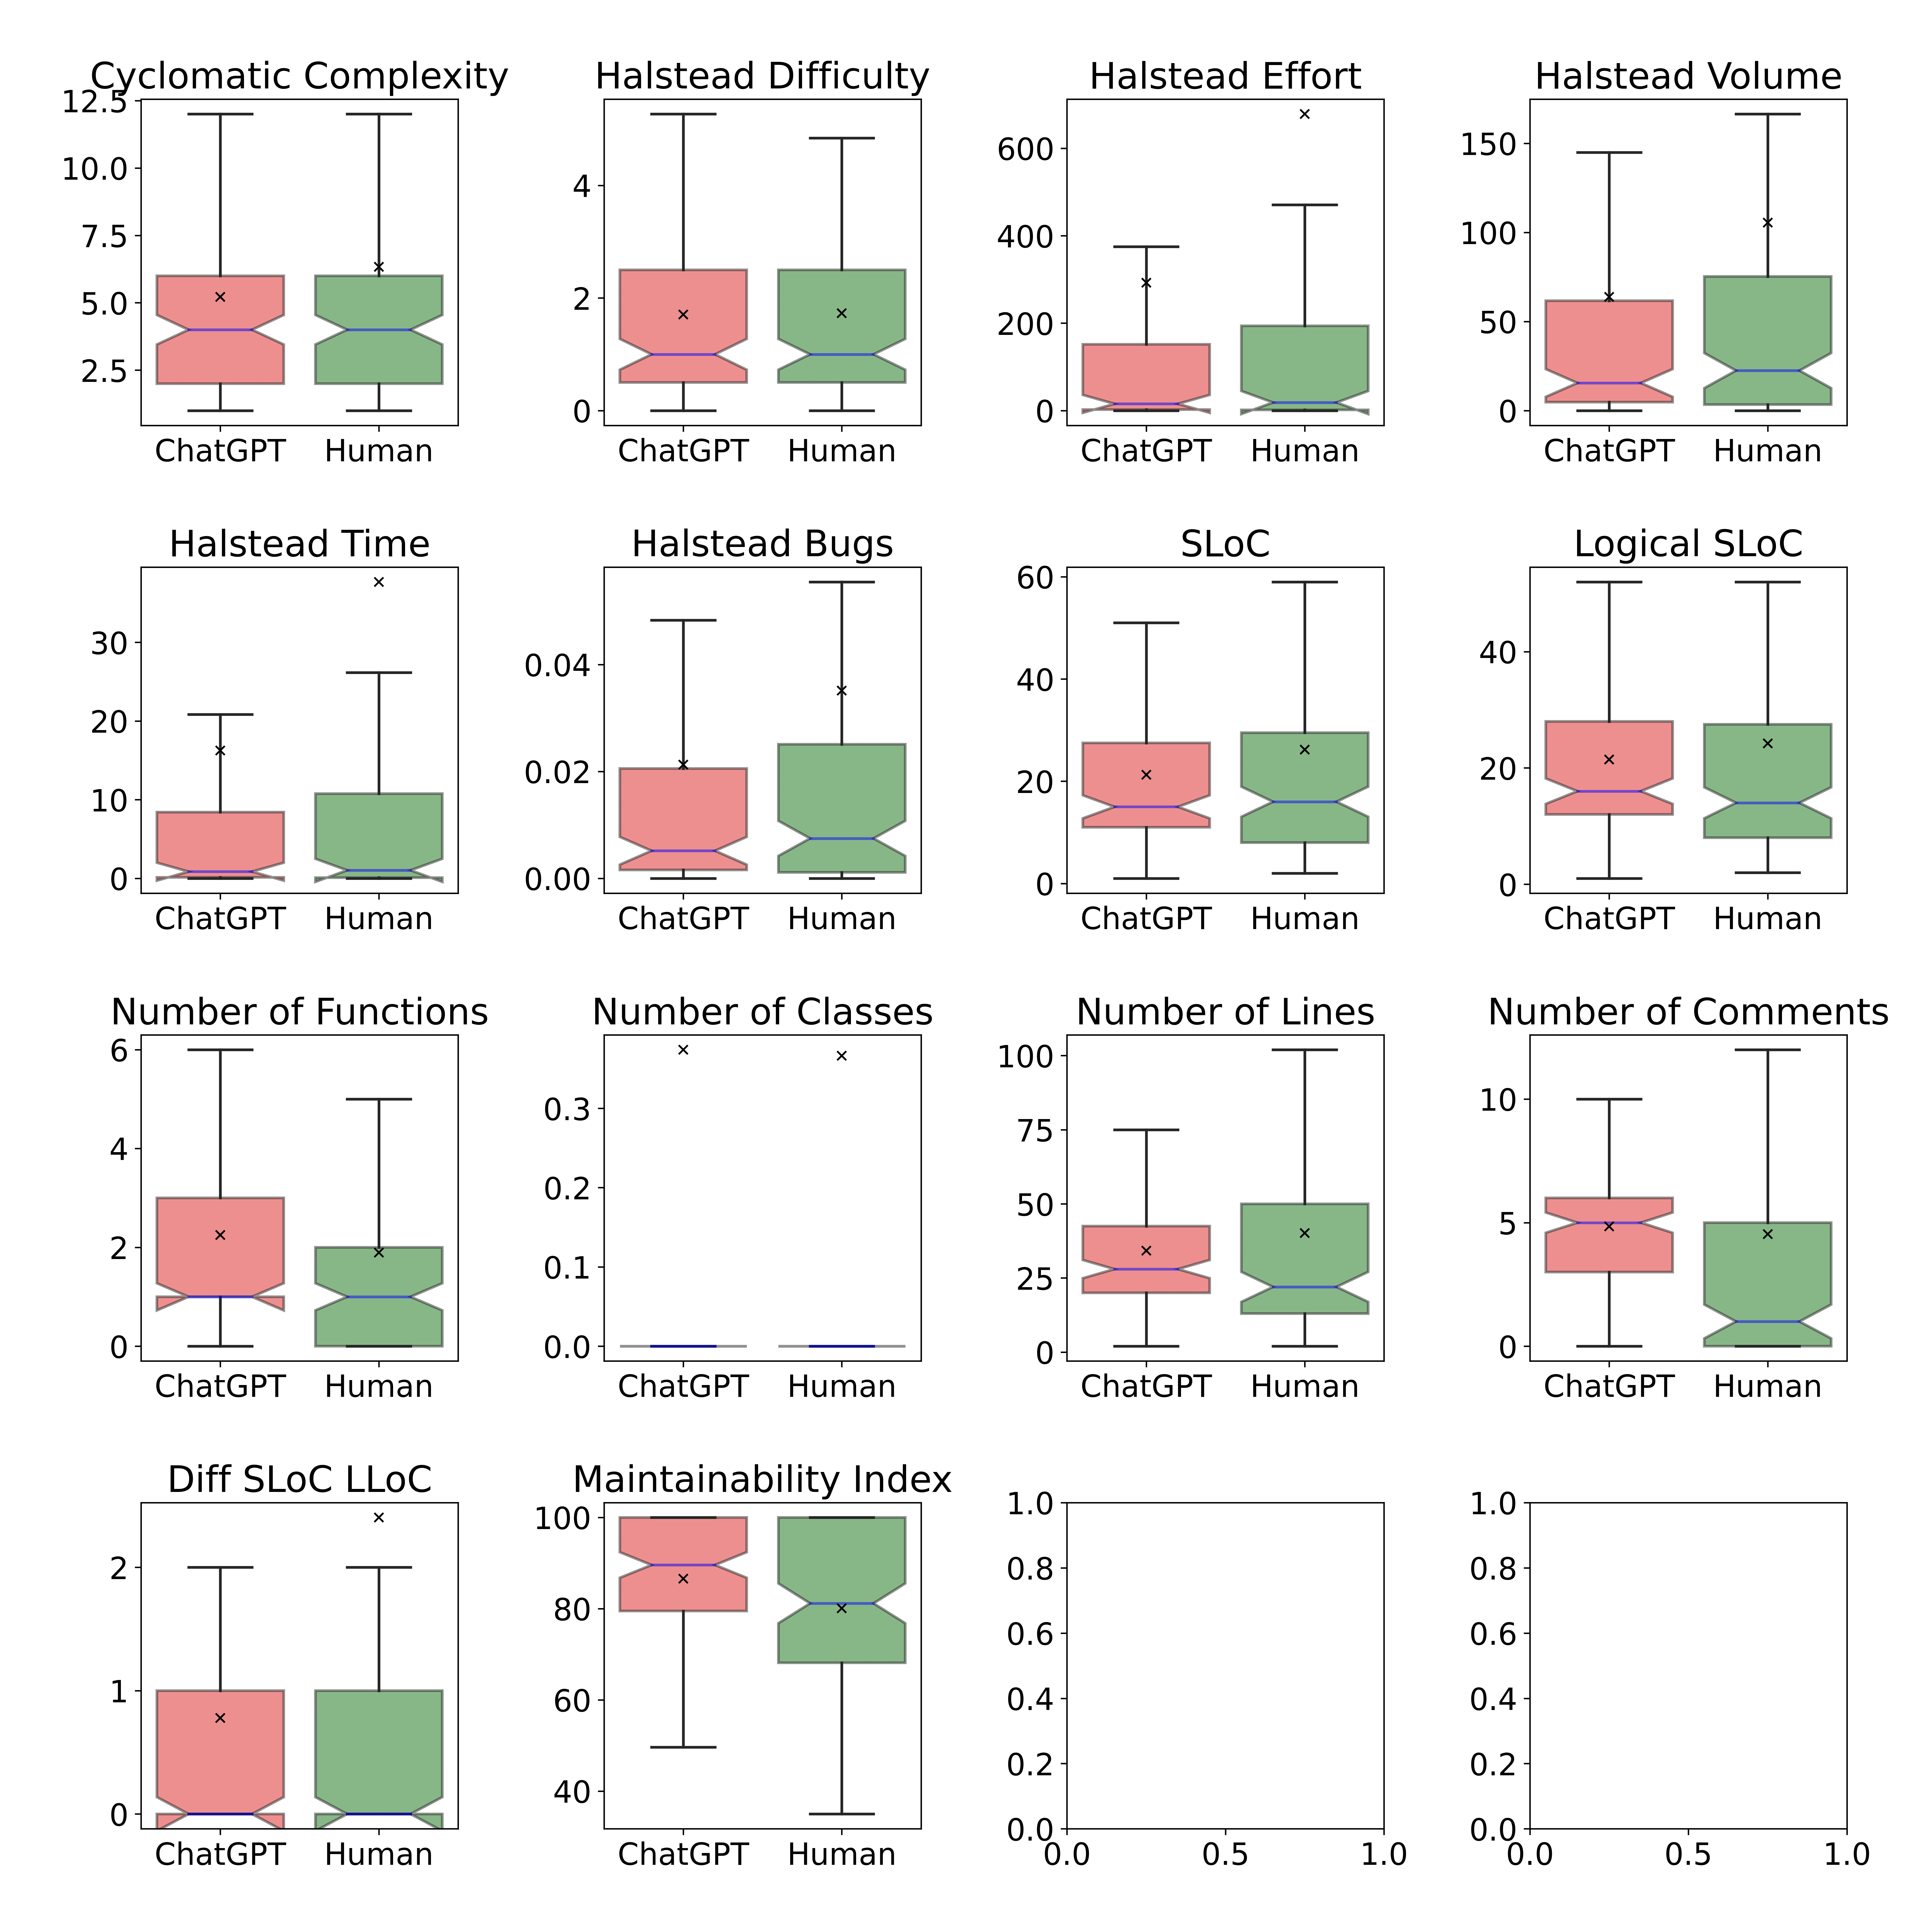 The box and whisker plot compares various metrics between ChatGPT and human code. Metrics include Cyclomatic Complexity, Halstead Difficulty, Halstead Effort, Halstead Volume, Halstead Time, Halstead Bugs, SLoC, Logical SLoC, Number of Functions, Number of Classes, Number of Lines, Number of Comments, Diff SLoC LLoC, and Maintainability Index. Each metric is represented by a box plot showing median, mean, minimum, maximum, lower quartile, and upper quartile values.